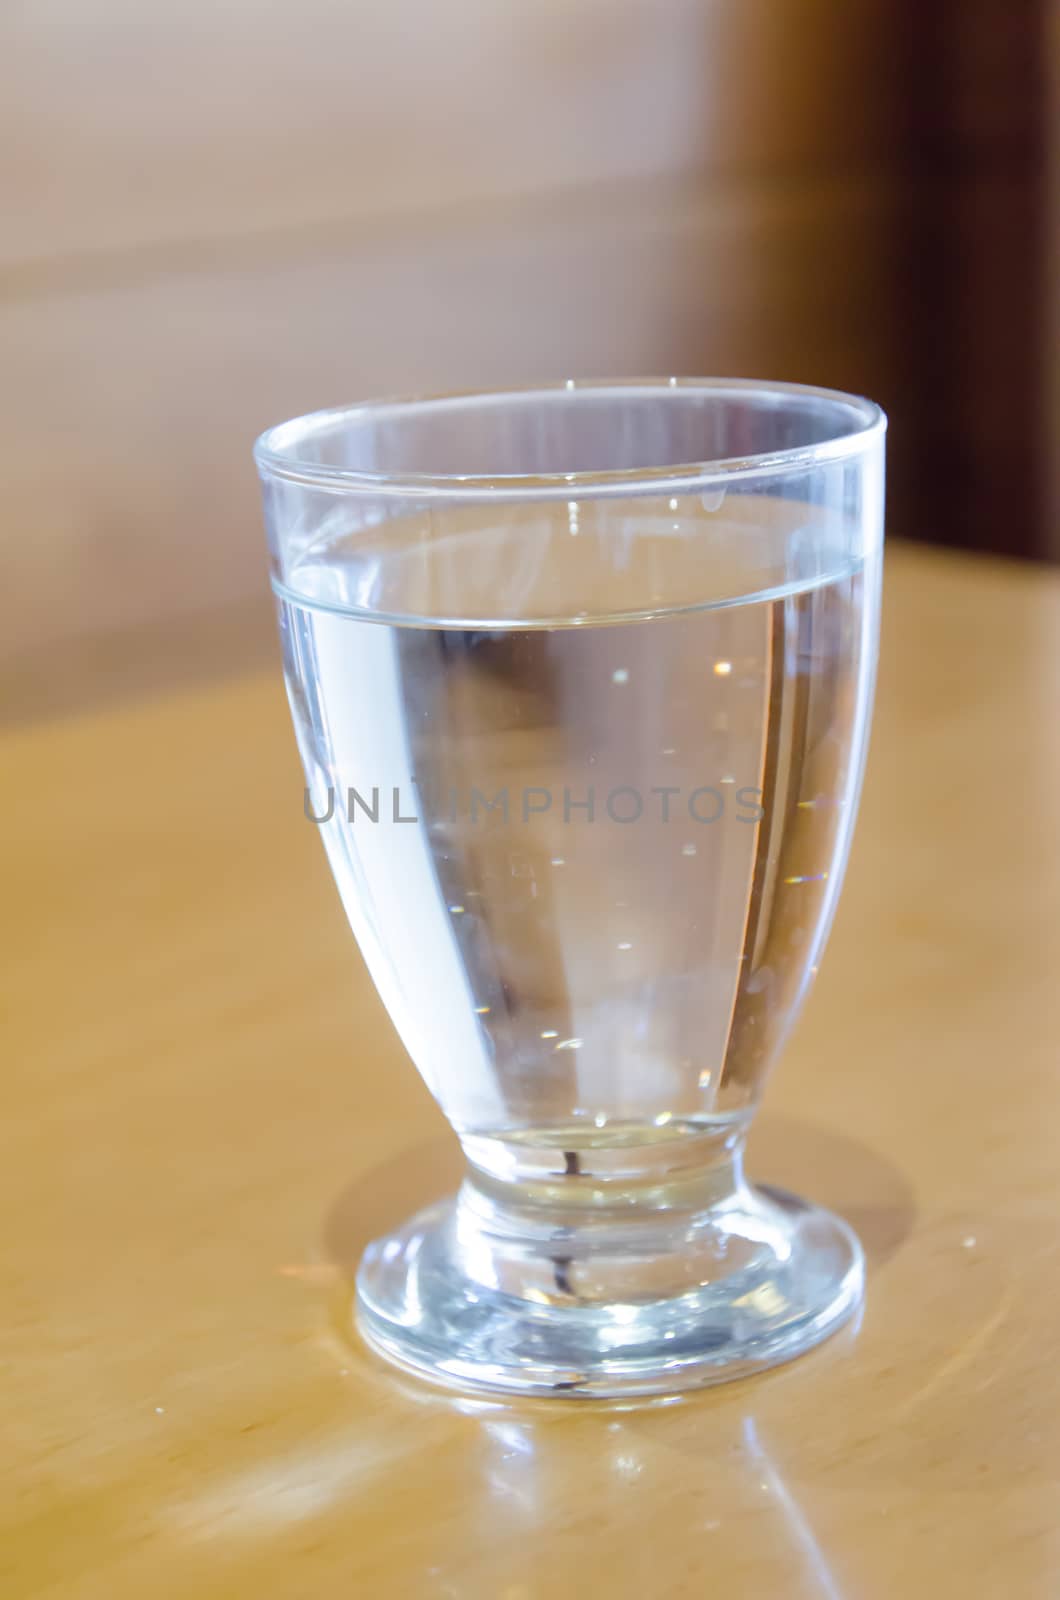 Water in a glass placed on the table.